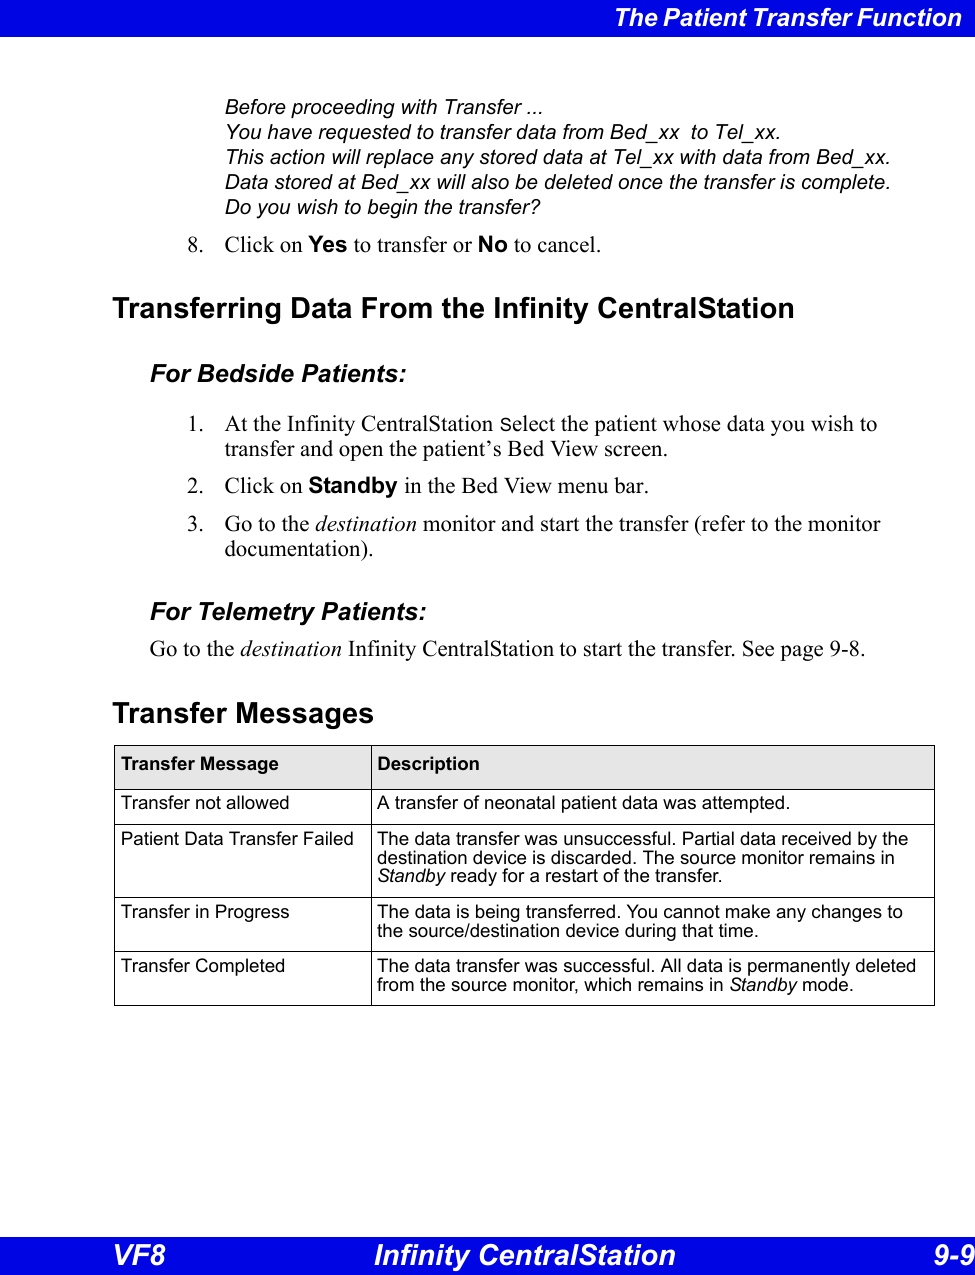 The Patient Transfer Function VF8 Infinity CentralStation 9-9 Before proceeding with Transfer ...You have requested to transfer data from Bed_xx  to Tel_xx.This action will replace any stored data at Tel_xx with data from Bed_xx.Data stored at Bed_xx will also be deleted once the transfer is complete.Do you wish to begin the transfer?8. Click on Yes to transfer or No to cancel. Transferring Data From the Infinity CentralStationFor Bedside Patients:1. At the Infinity CentralStation Select the patient whose data you wish to transfer and open the patient’s Bed View screen.2. Click on Standby in the Bed View menu bar.3. Go to the destination monitor and start the transfer (refer to the monitor documentation).For Telemetry Patients:Go to the destination Infinity CentralStation to start the transfer. See page 9-8.Transfer MessagesTransfer Message DescriptionTransfer not allowed A transfer of neonatal patient data was attempted.Patient Data Transfer Failed The data transfer was unsuccessful. Partial data received by the destination device is discarded. The source monitor remains in Standby ready for a restart of the transfer.Transfer in Progress The data is being transferred. You cannot make any changes to the source/destination device during that time.Transfer Completed The data transfer was successful. All data is permanently deleted from the source monitor, which remains in Standby mode.